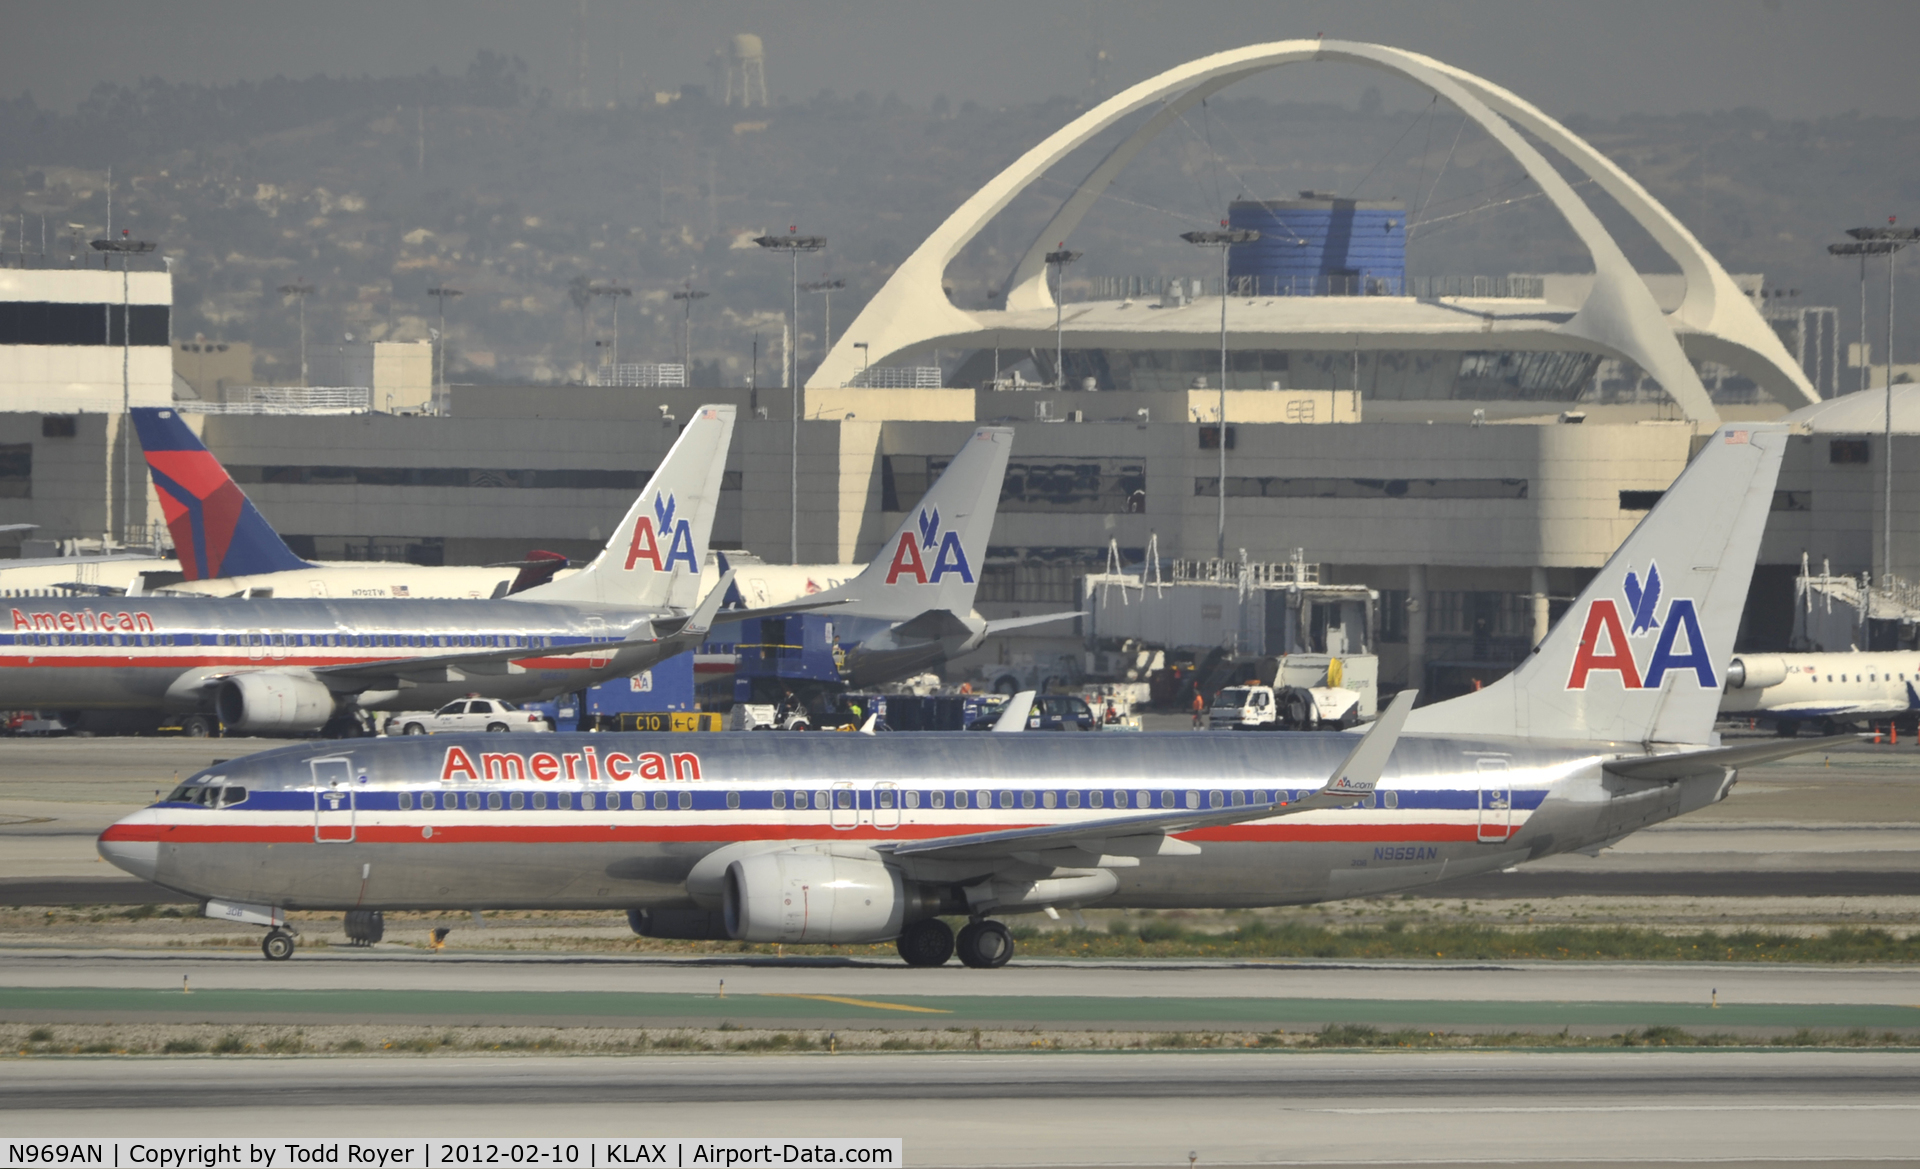 N969AN, 2001 Boeing 737-823 C/N 29546, Just arrived at LAX on 25L